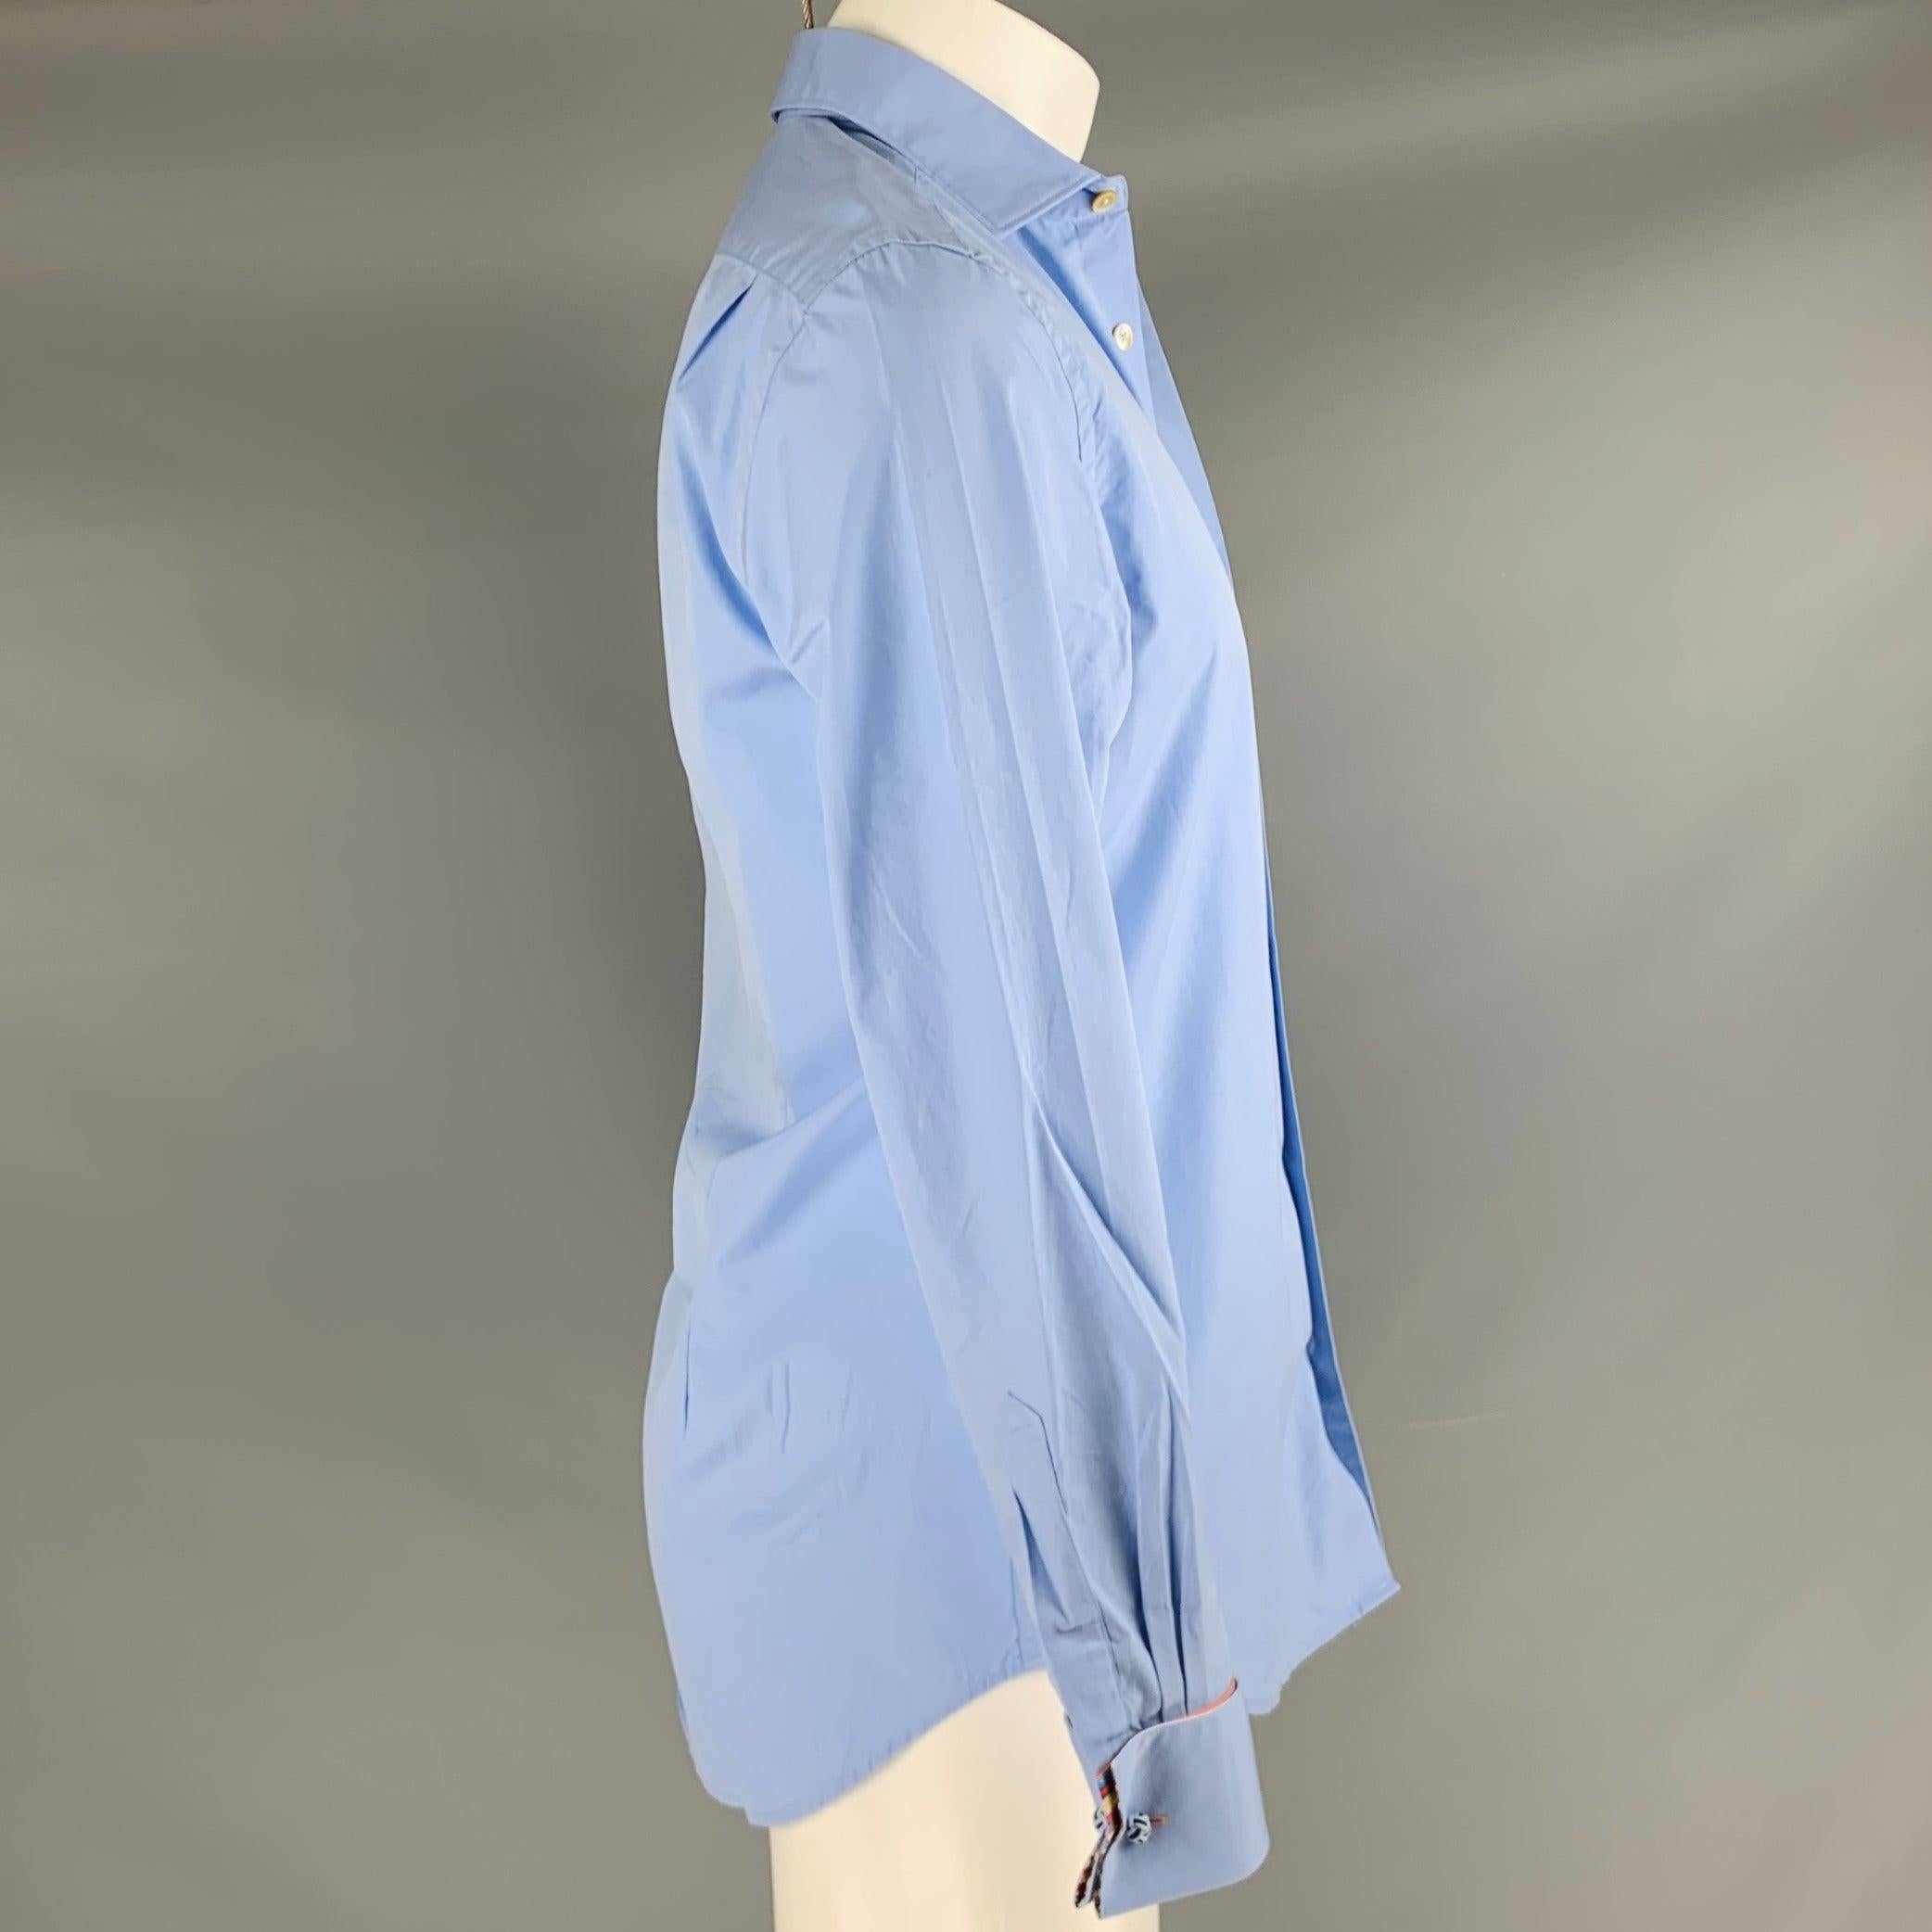 PAUL SMITH long sleeve shirt
in a blue cotton woven fabric featuring spread collar, French cuffs, and button closure. Comes with cufflinks. Made in Italy.Excellent Pre-Owned Condition. 

Marked:   15